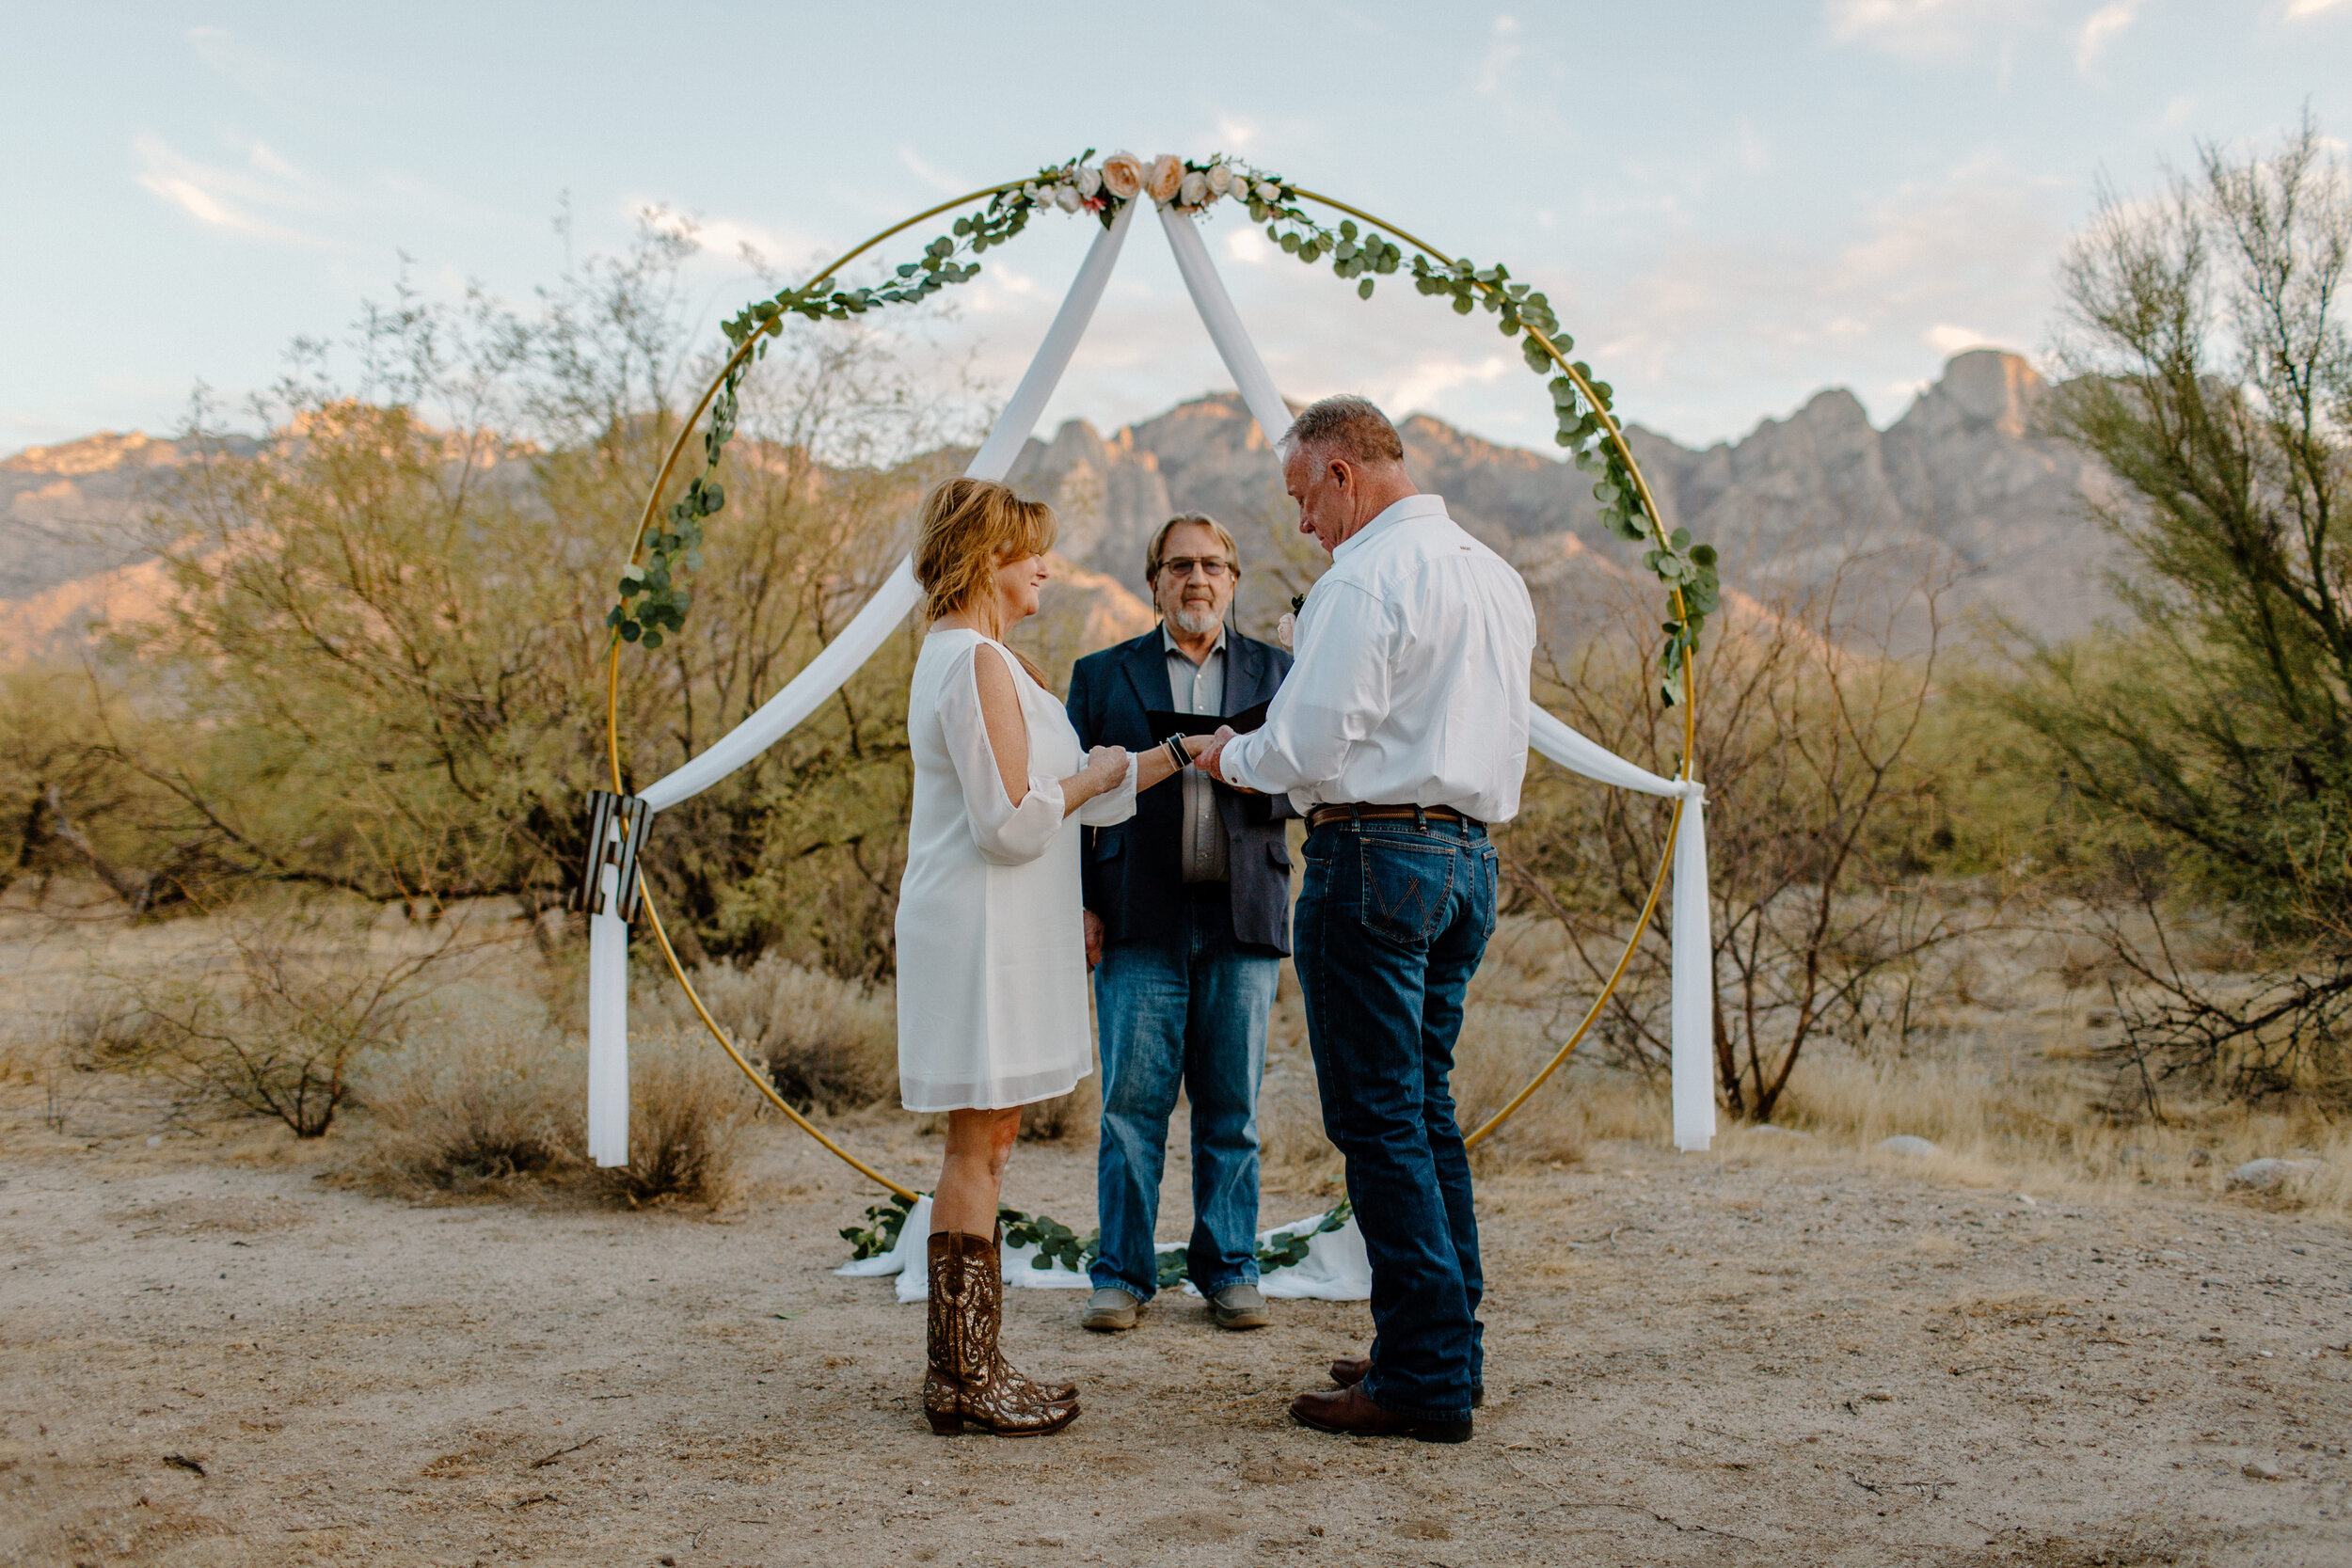  Groom puts a wedding band on his bride’s finger in front of a mountain backdrop in Catalina State Park in Tucson. Tucson elopement photographer, Lucy B. Photography. 